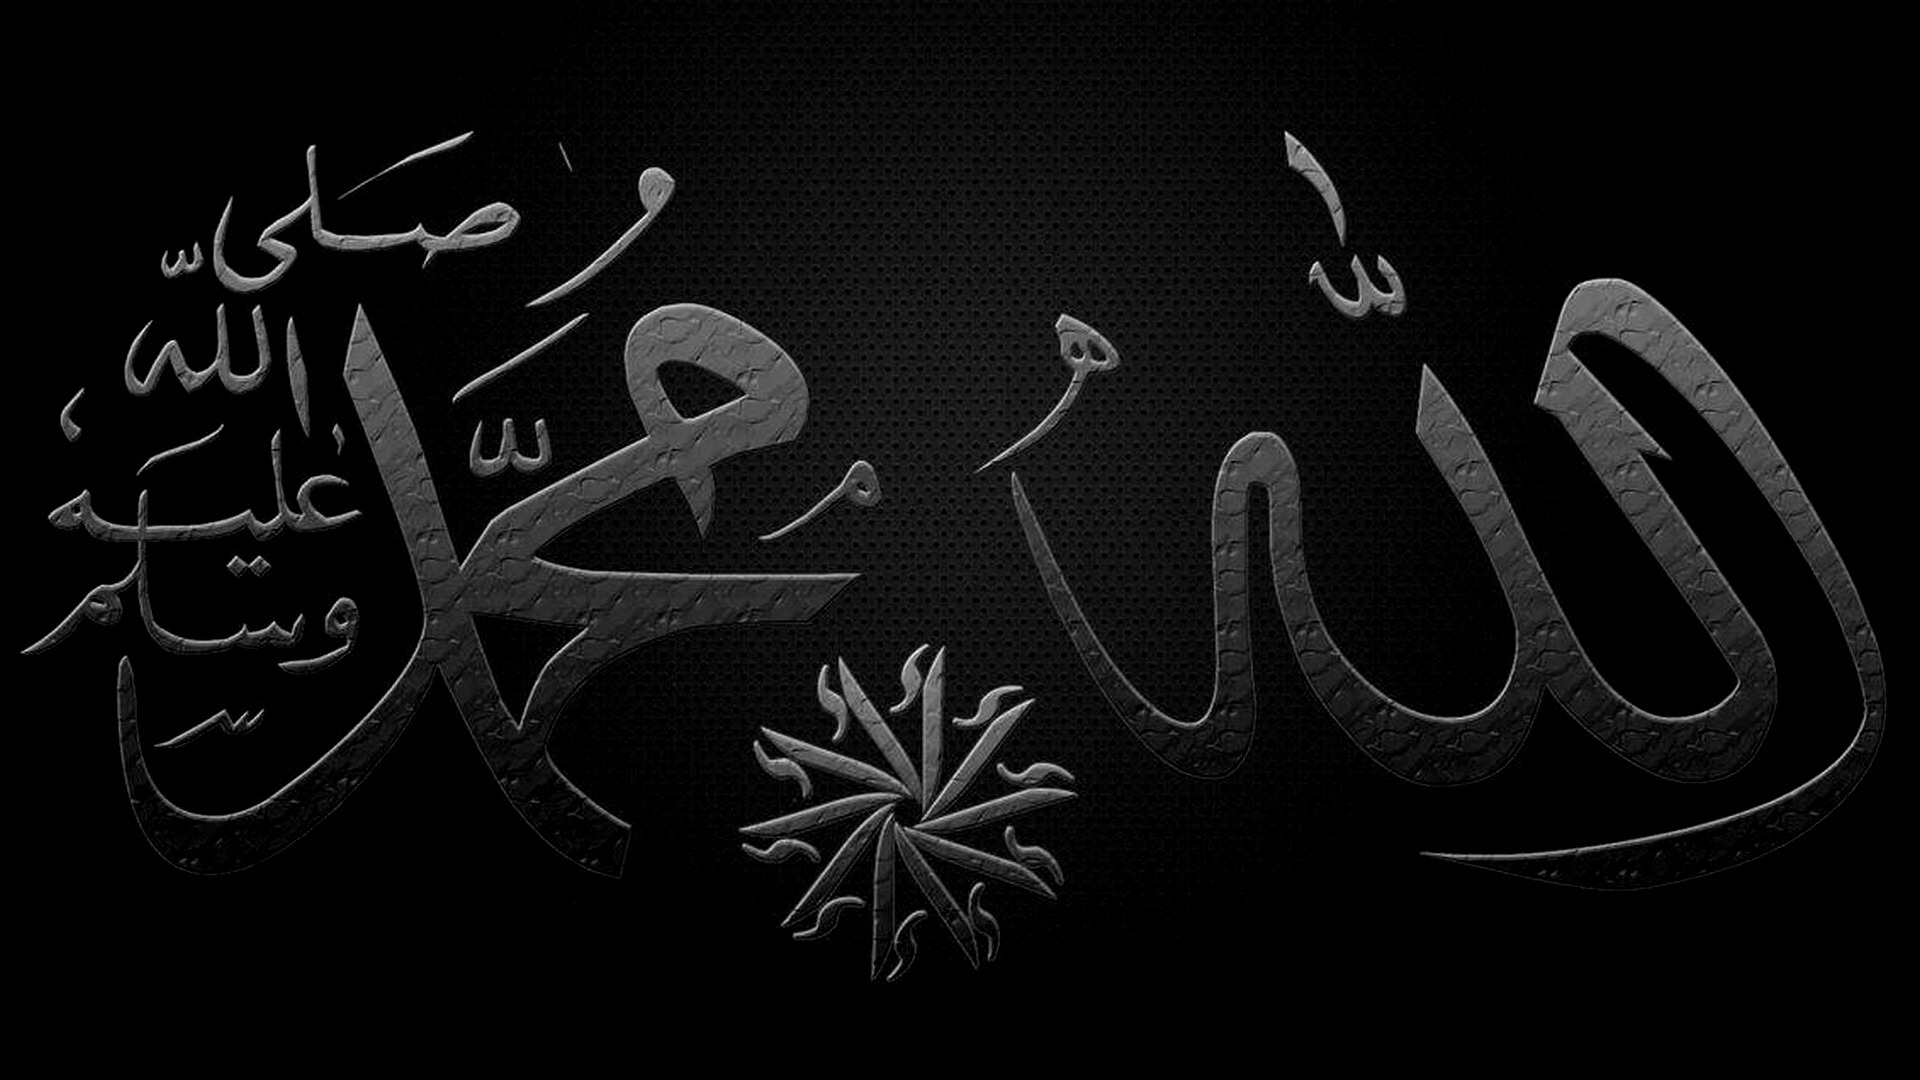 Muhammad Wallpaper HD Laptop With high-resolution 1920X1080 pixel. You can use and set as wallpaper for Notebook Screensavers, Mac Wallpapers, Mobile Home Screen, iPhone or Android Phones Lock Screen